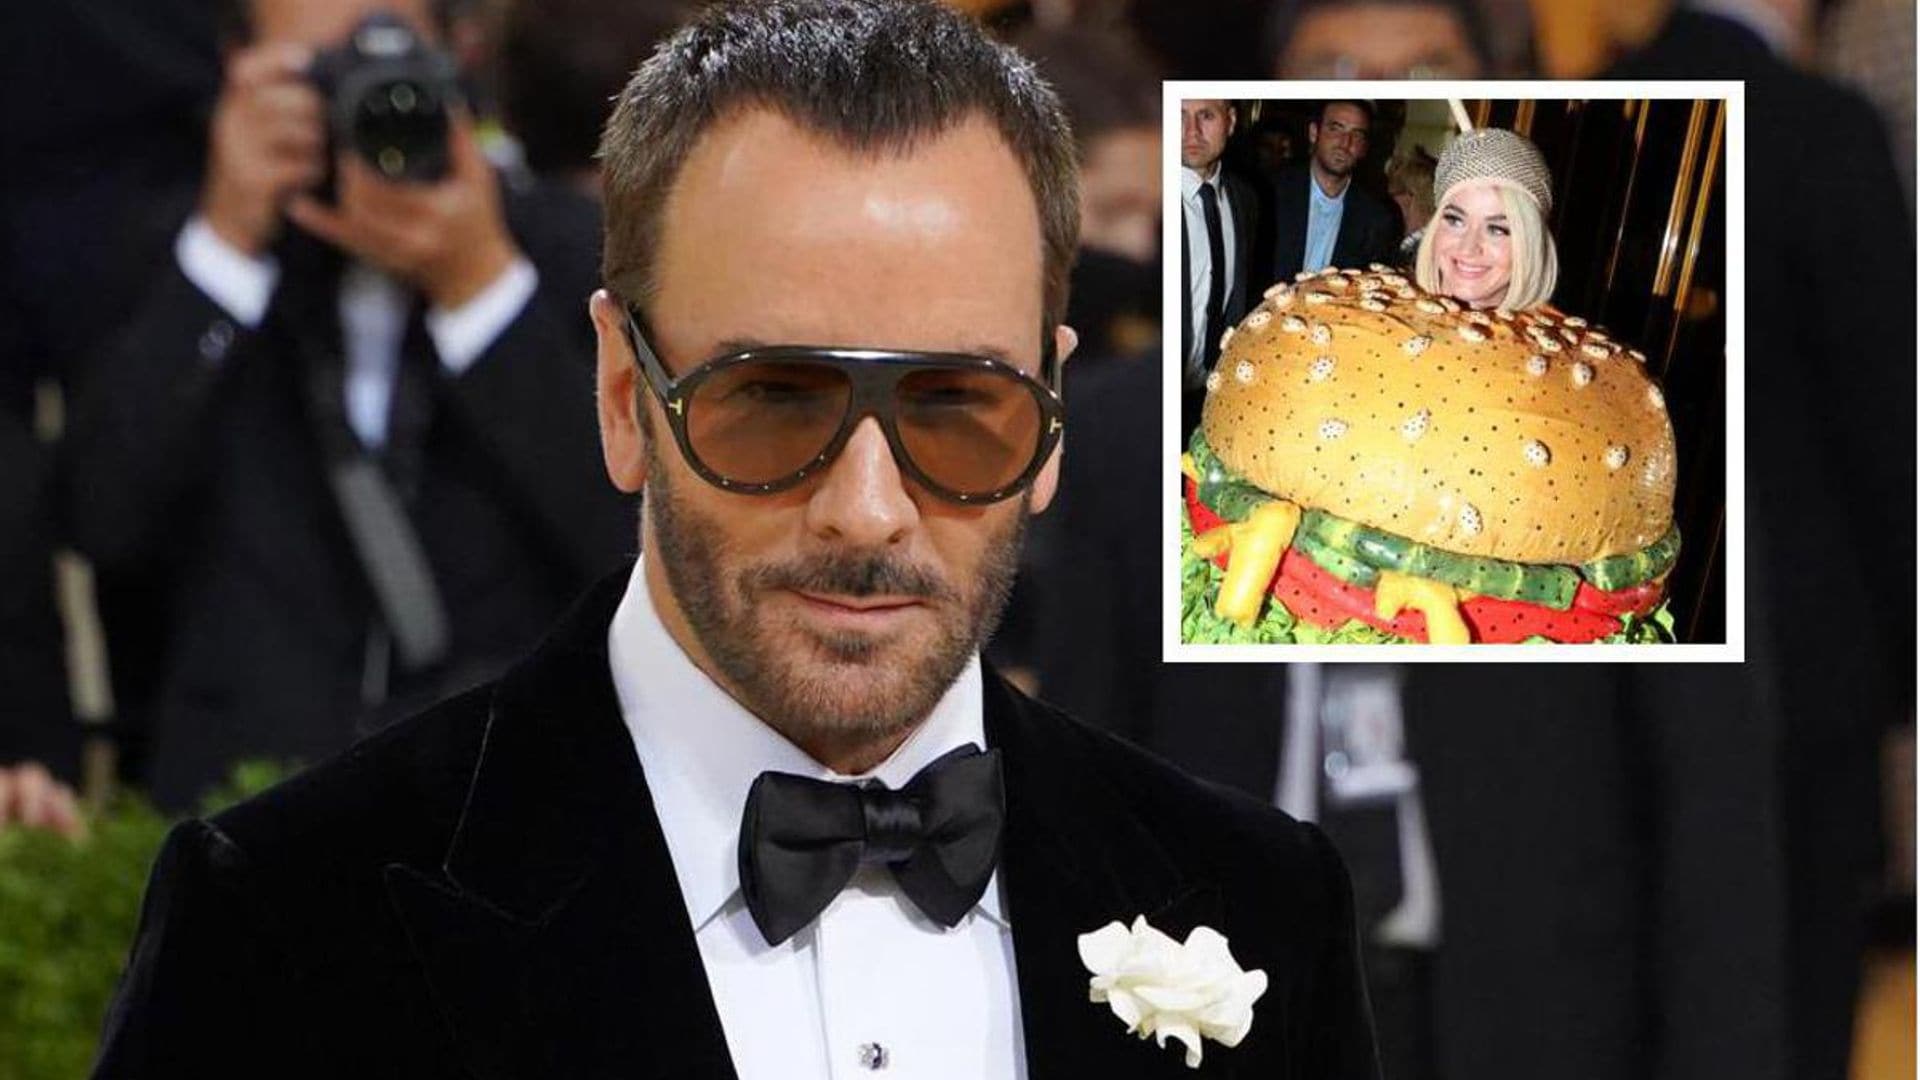 Tom Ford criticizes Met Gala looks: ‘It’s turned into a costume party’